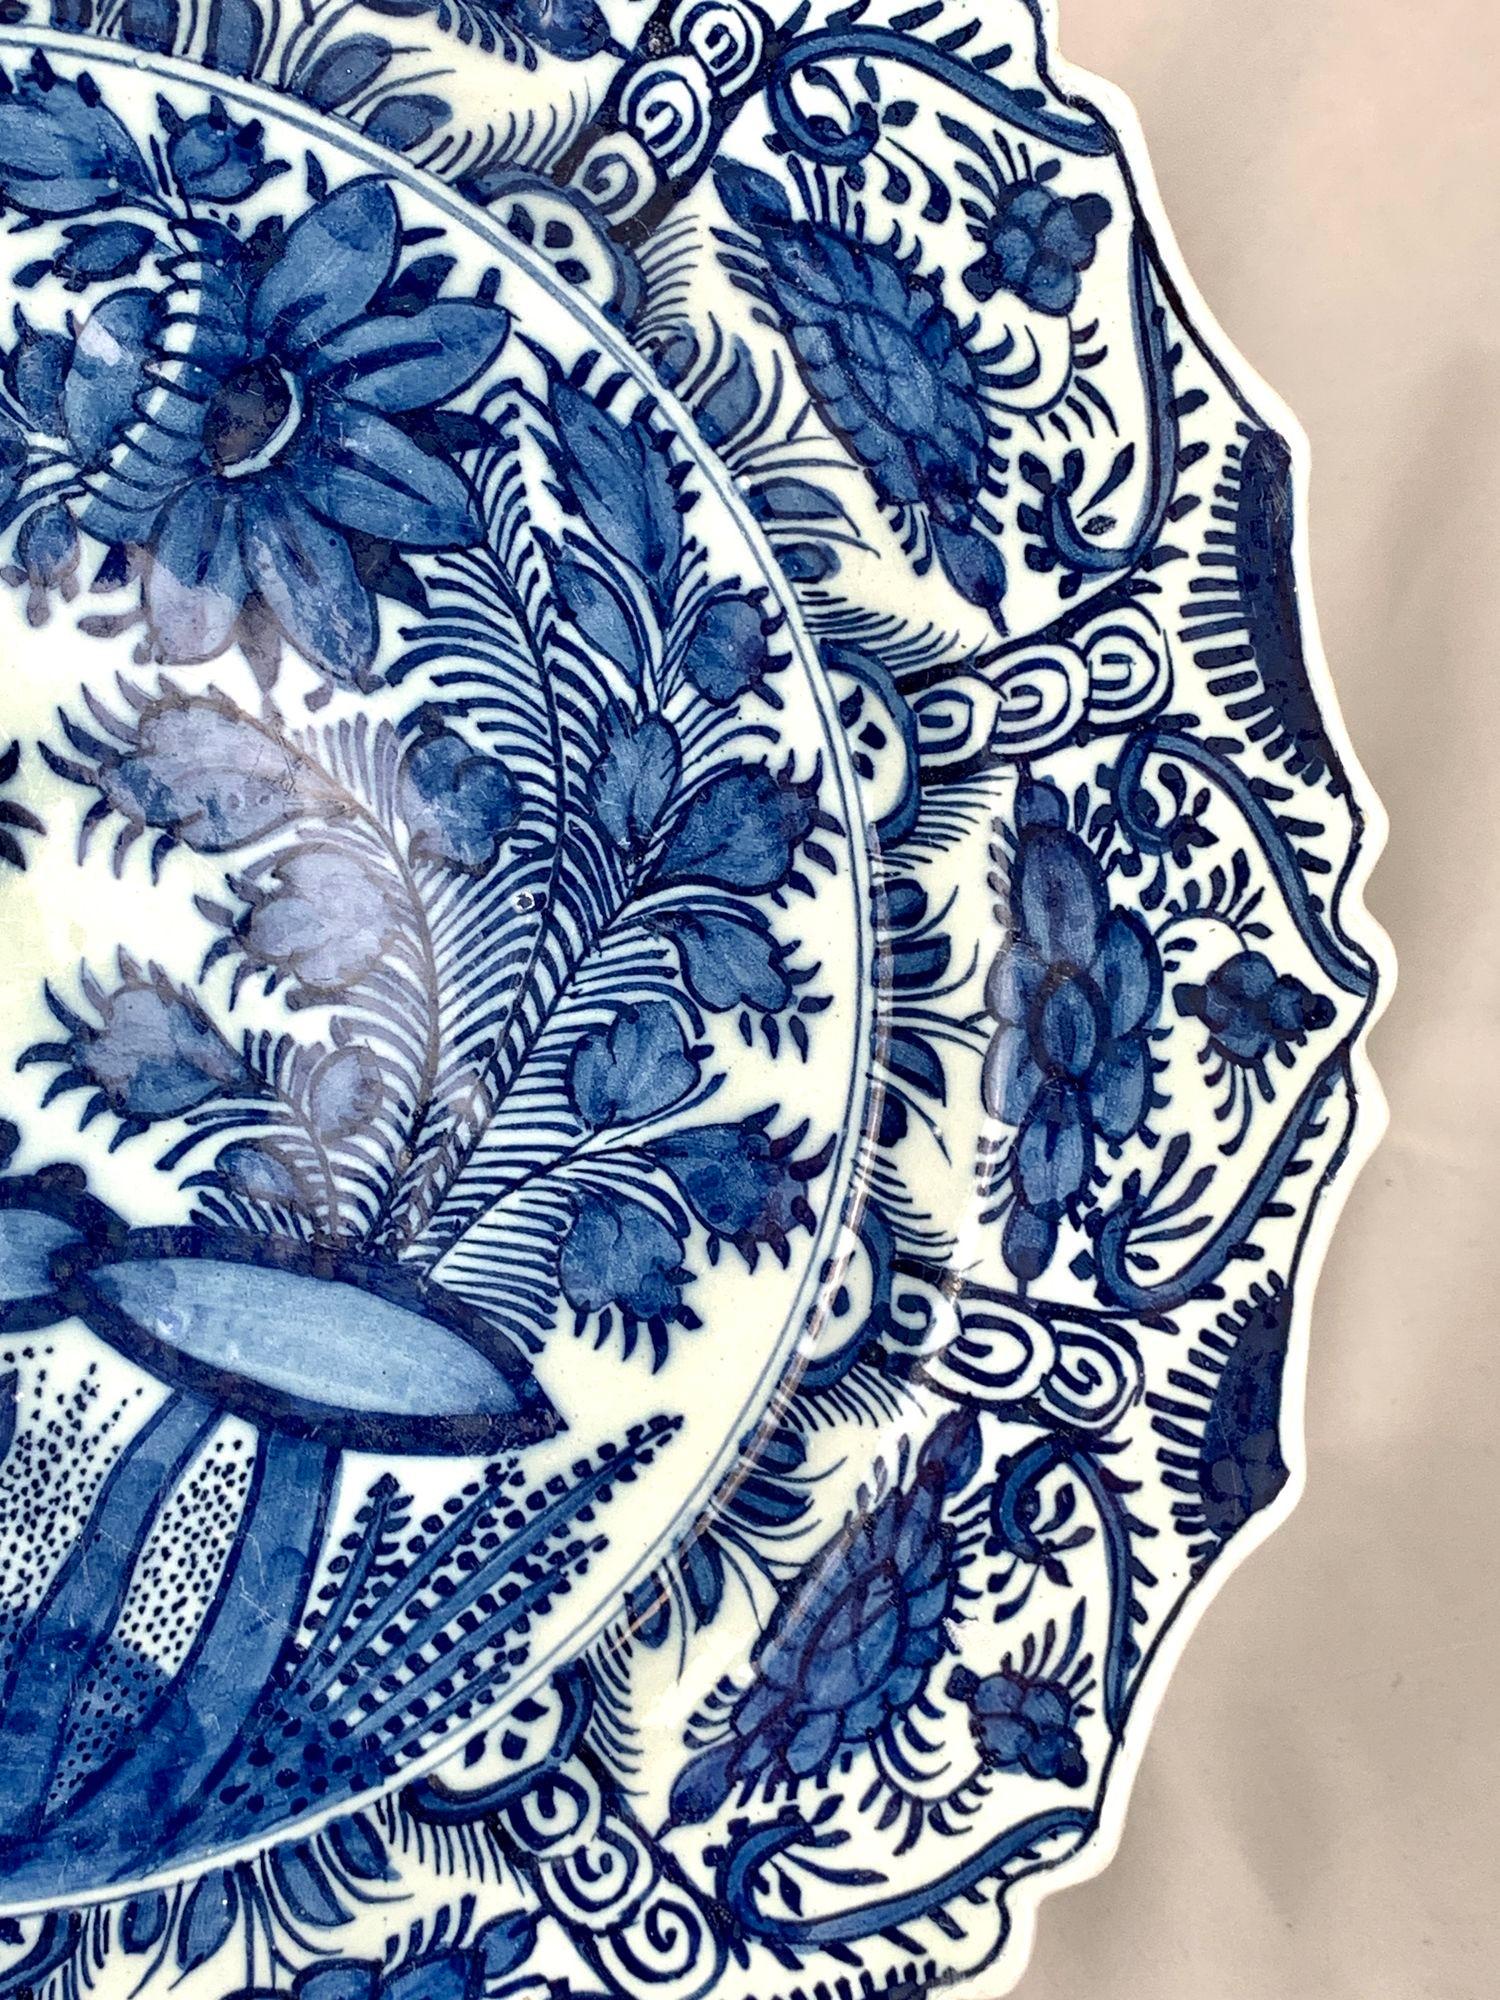 Blue and White Delft Charger Hand Painted at The Axe Holland Circa 1770 In Excellent Condition For Sale In Katonah, NY